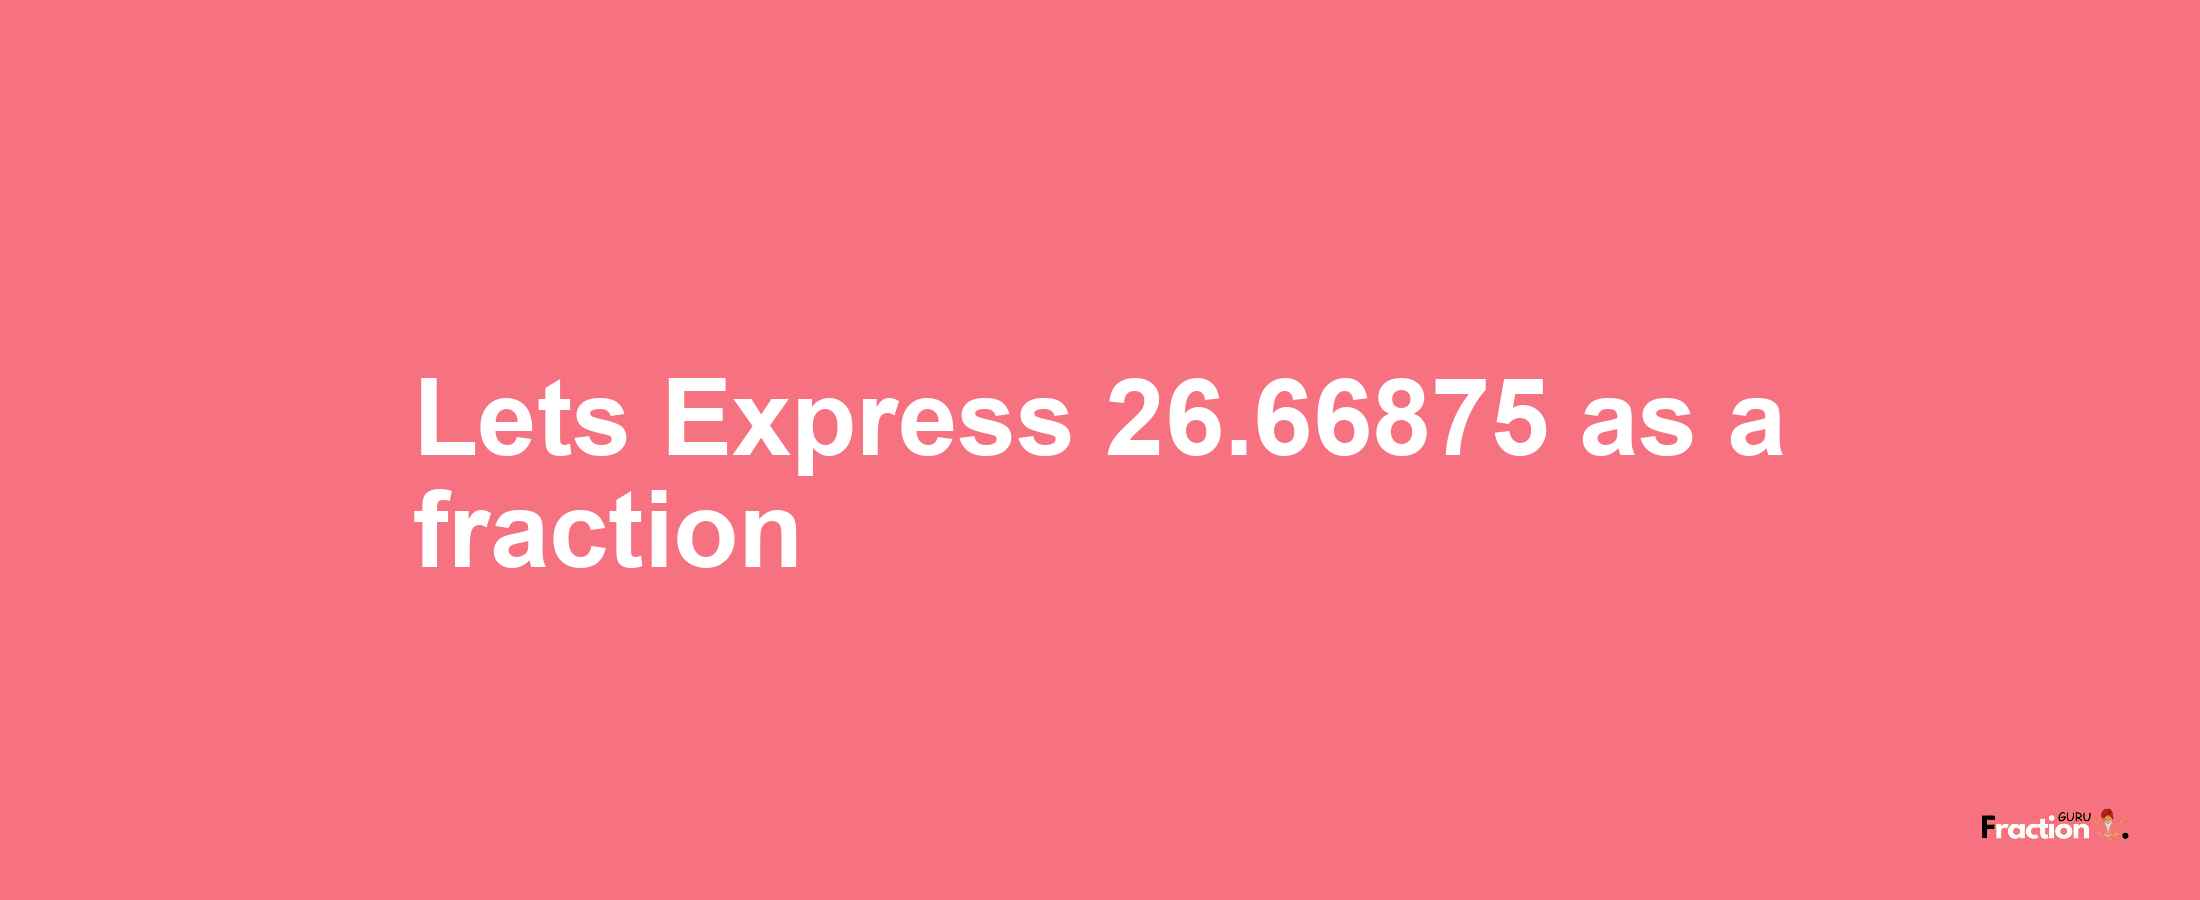 Lets Express 26.66875 as afraction